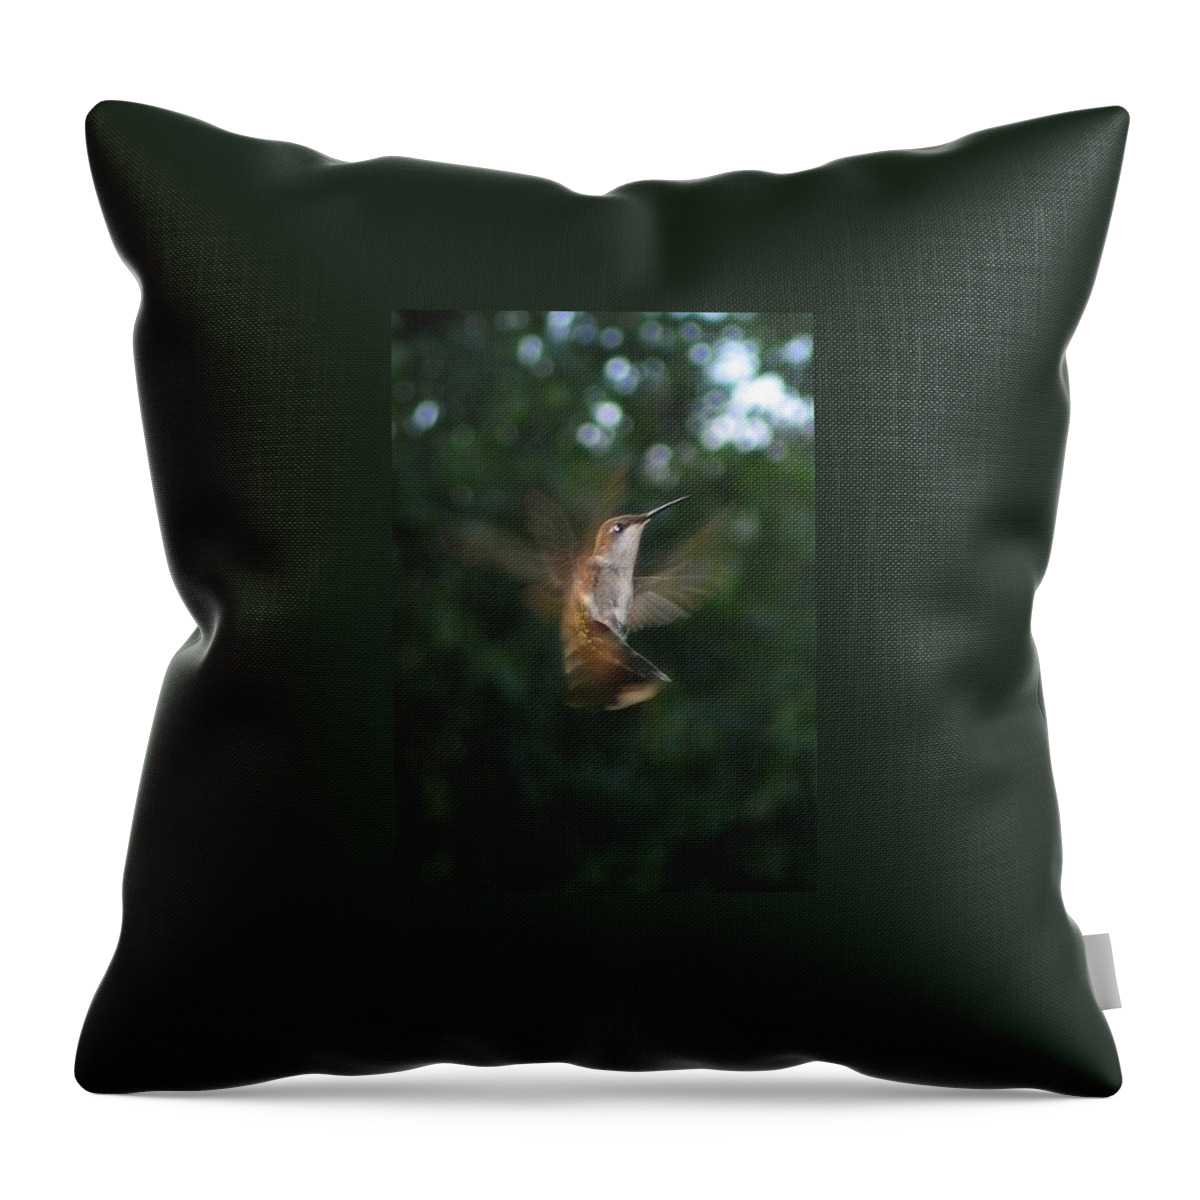 Bird Throw Pillow featuring the photograph In Flight by Photographic Arts And Design Studio